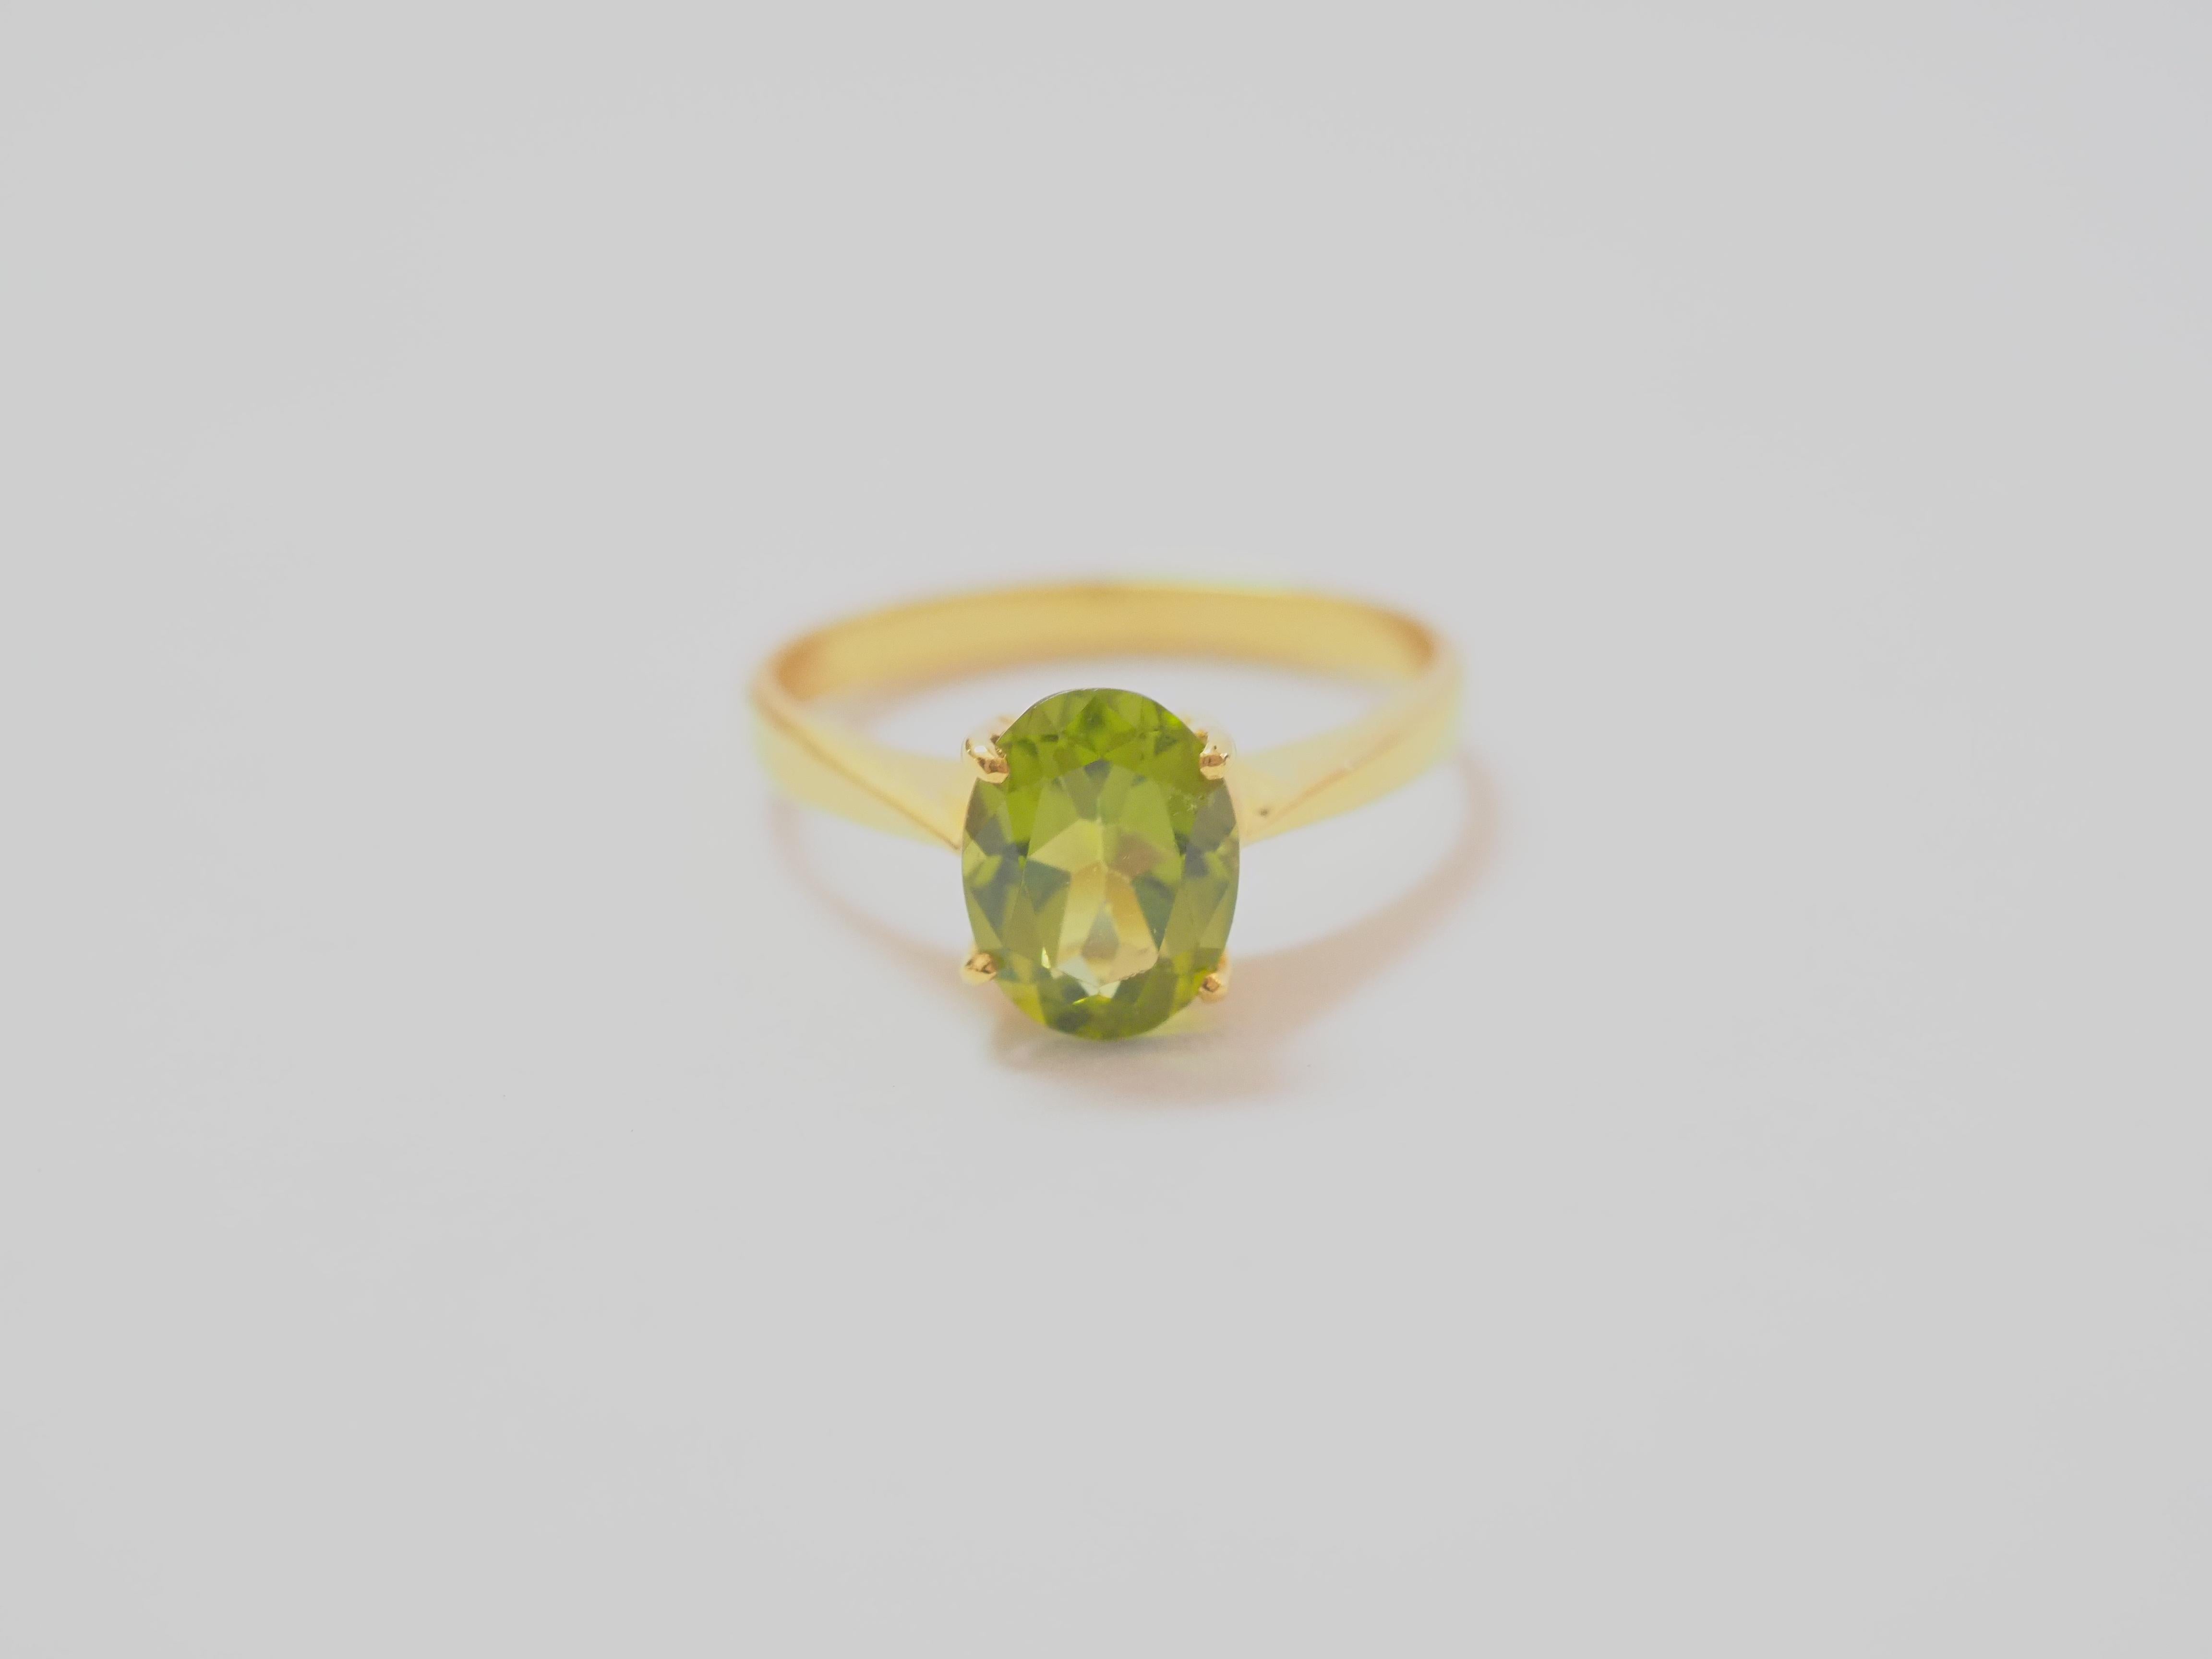 This beautiful solitaire engagement ring boasts a very stunning 1.80 carats clear and olive-green color oval peridot as the main stone! The ring looks dainty but the shank is actually very solid. The quality mounting with timeless Italian solitaire